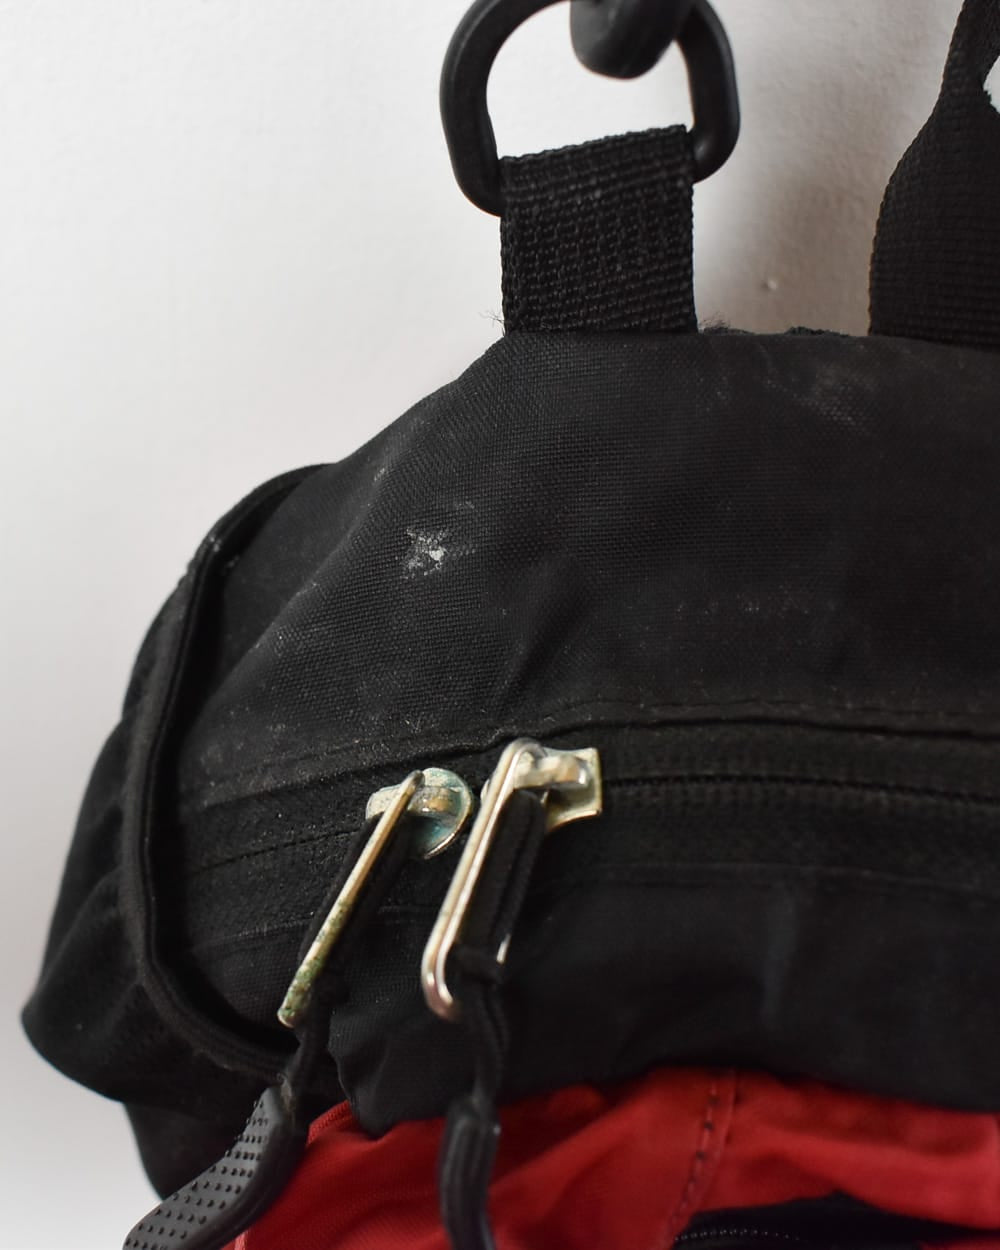  The North Face Sling Bag